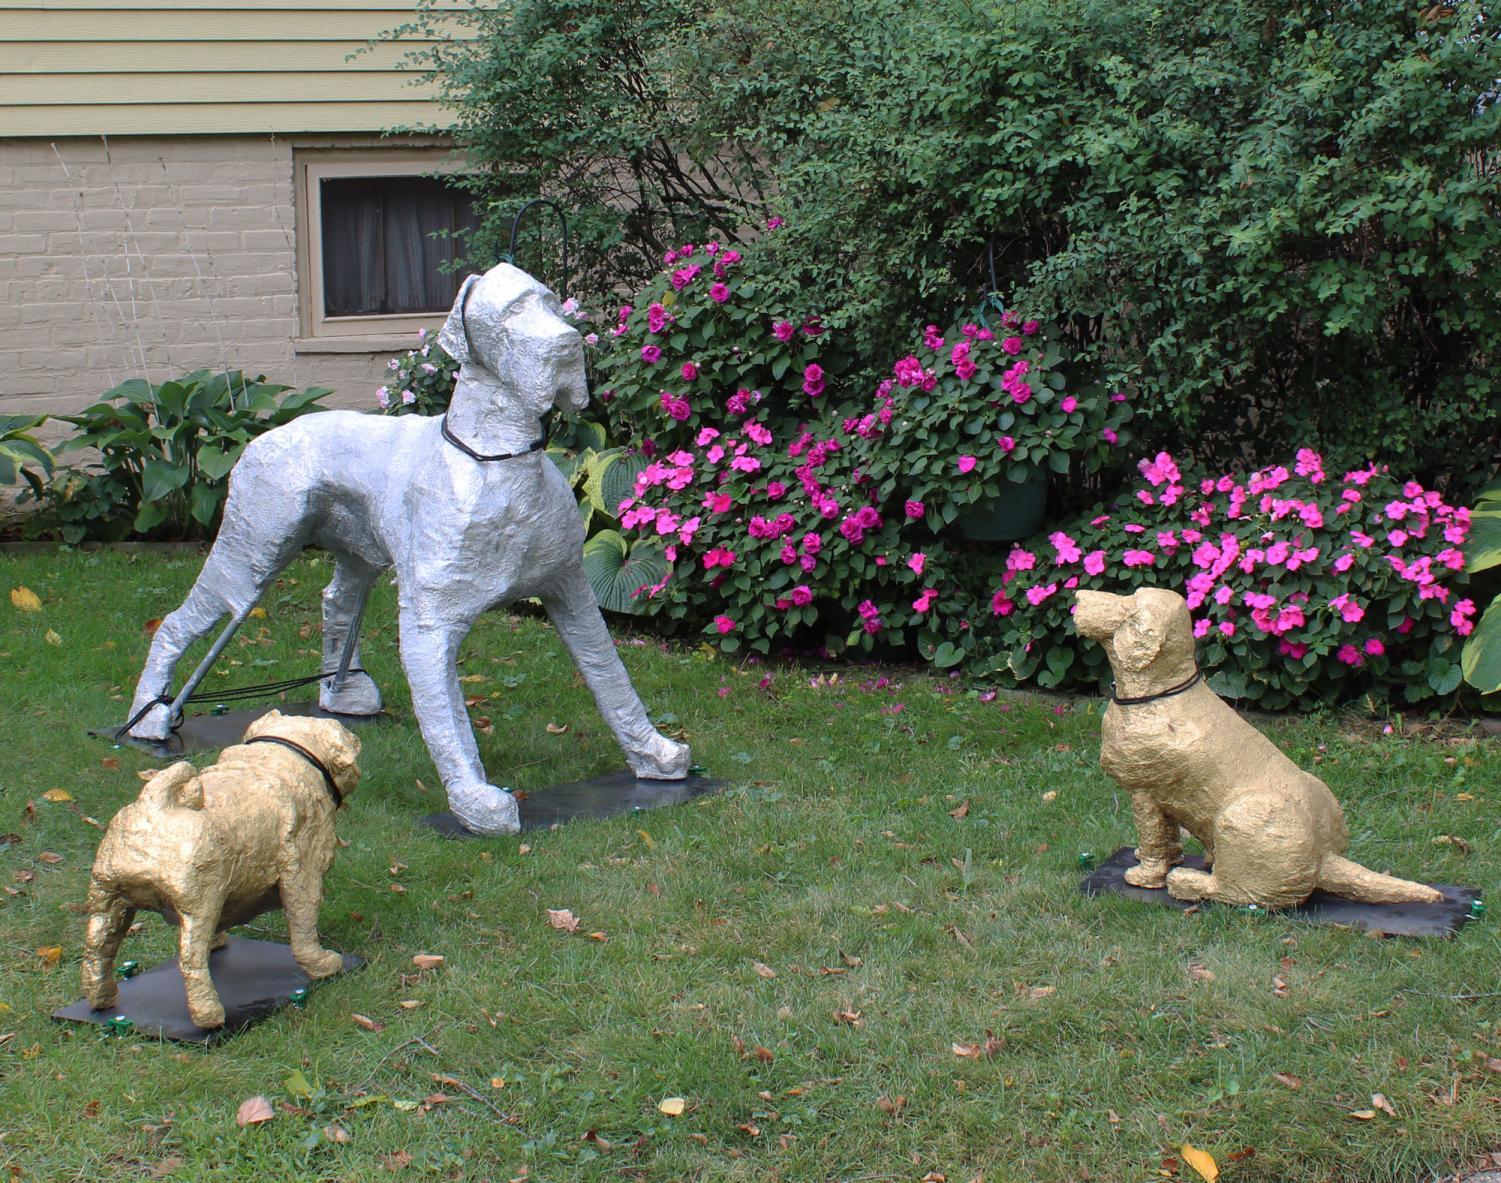 Three+sculptures+on+grass.+A+silver+great+dane+stands+over+a+gold+foil+pug+and+beagle.